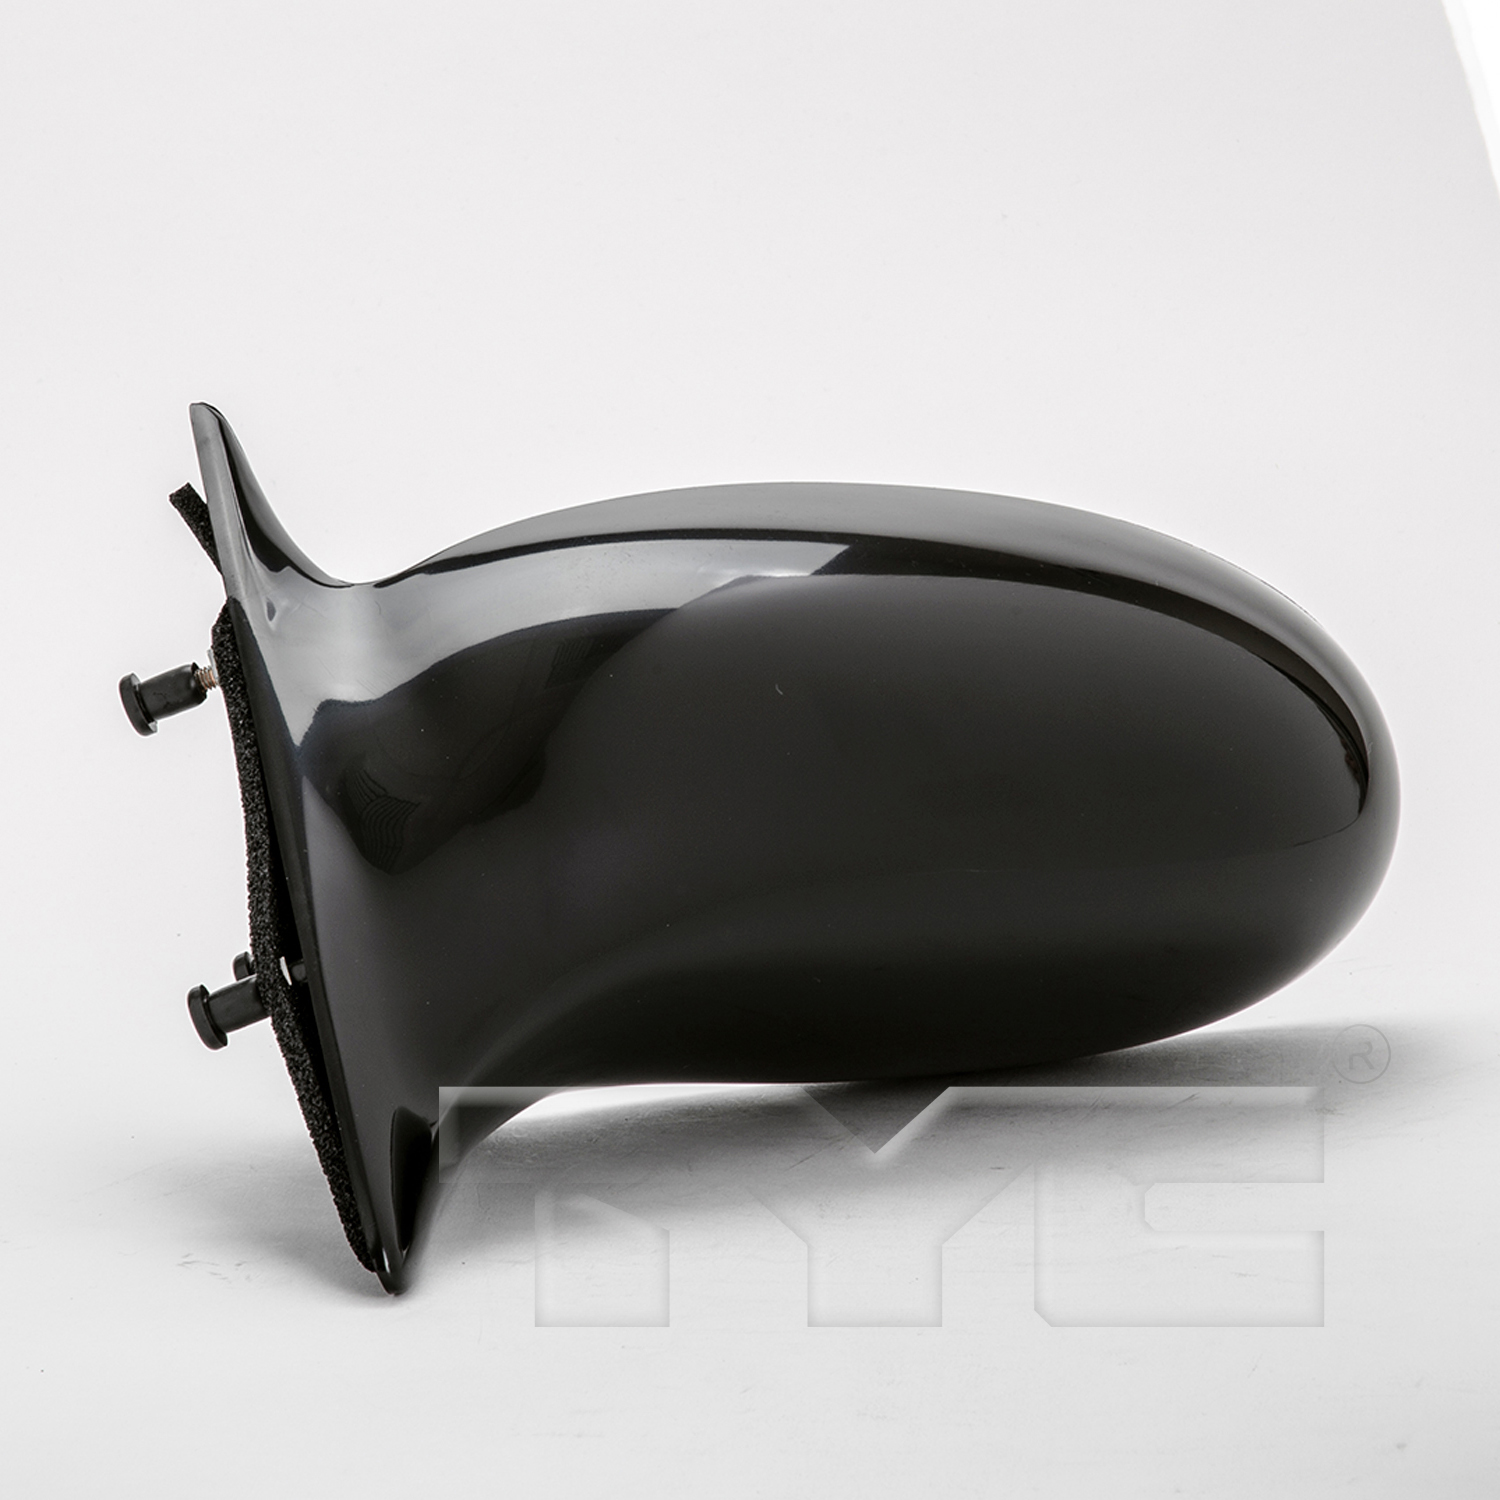 Aftermarket MIRRORS for OLDSMOBILE - ALERO, ALERO,02-04,LT Mirror outside rear view